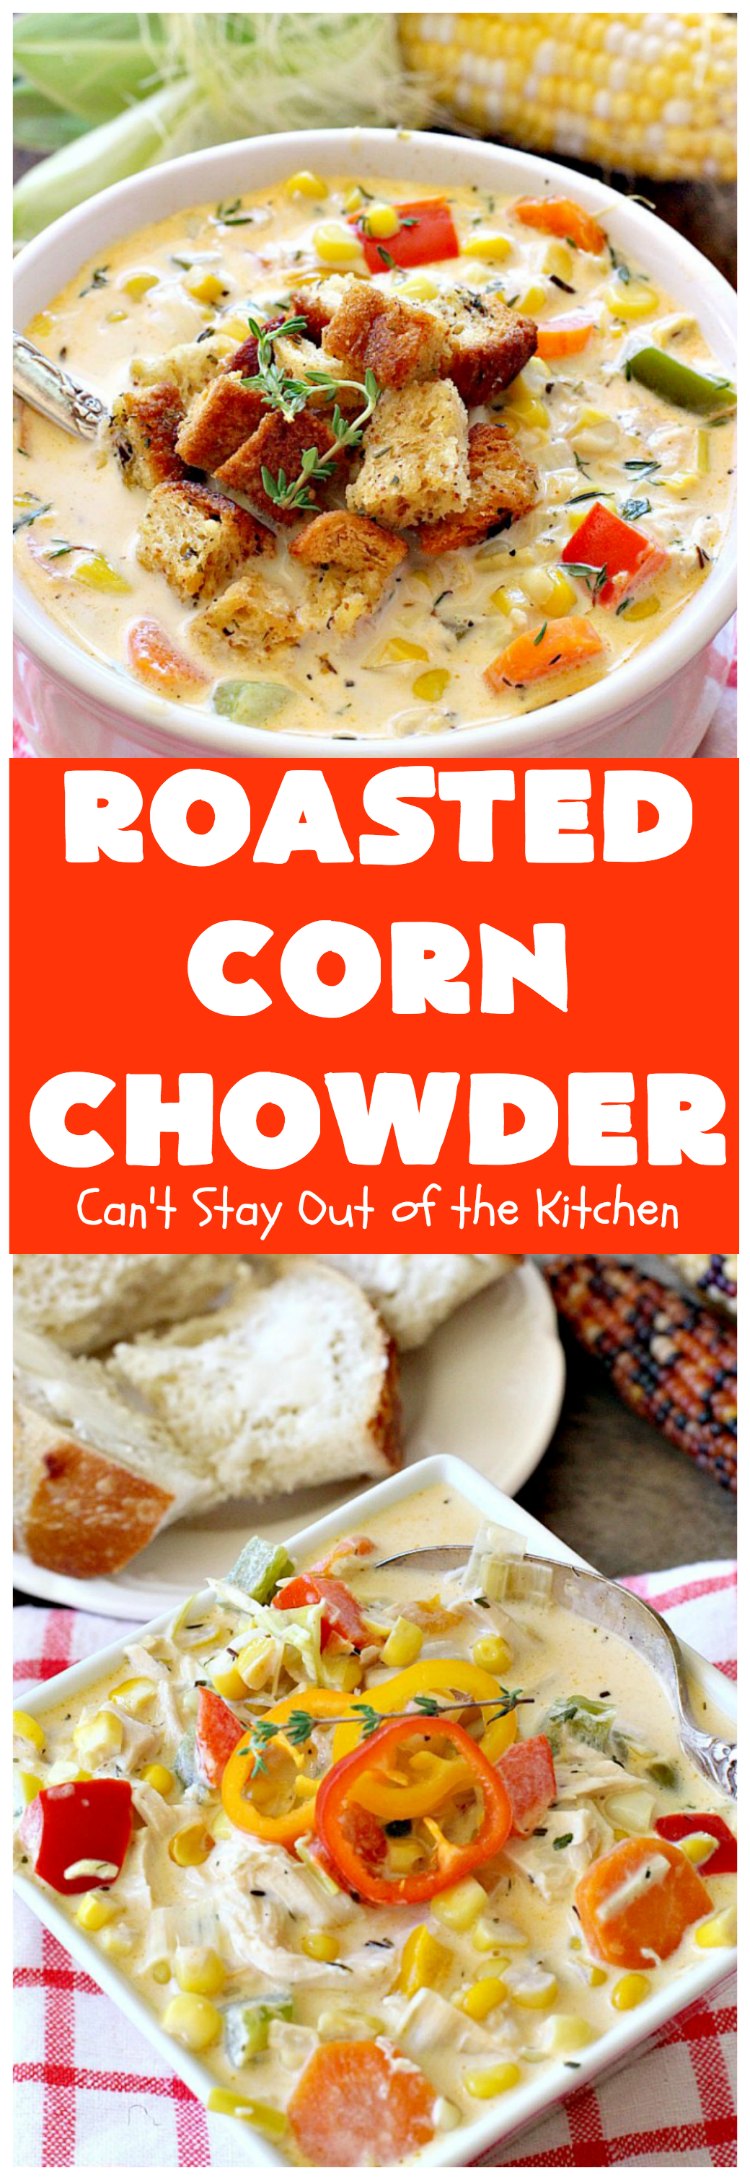 Roasted Corn Chowder | Can't Stay Out of the Kitchen